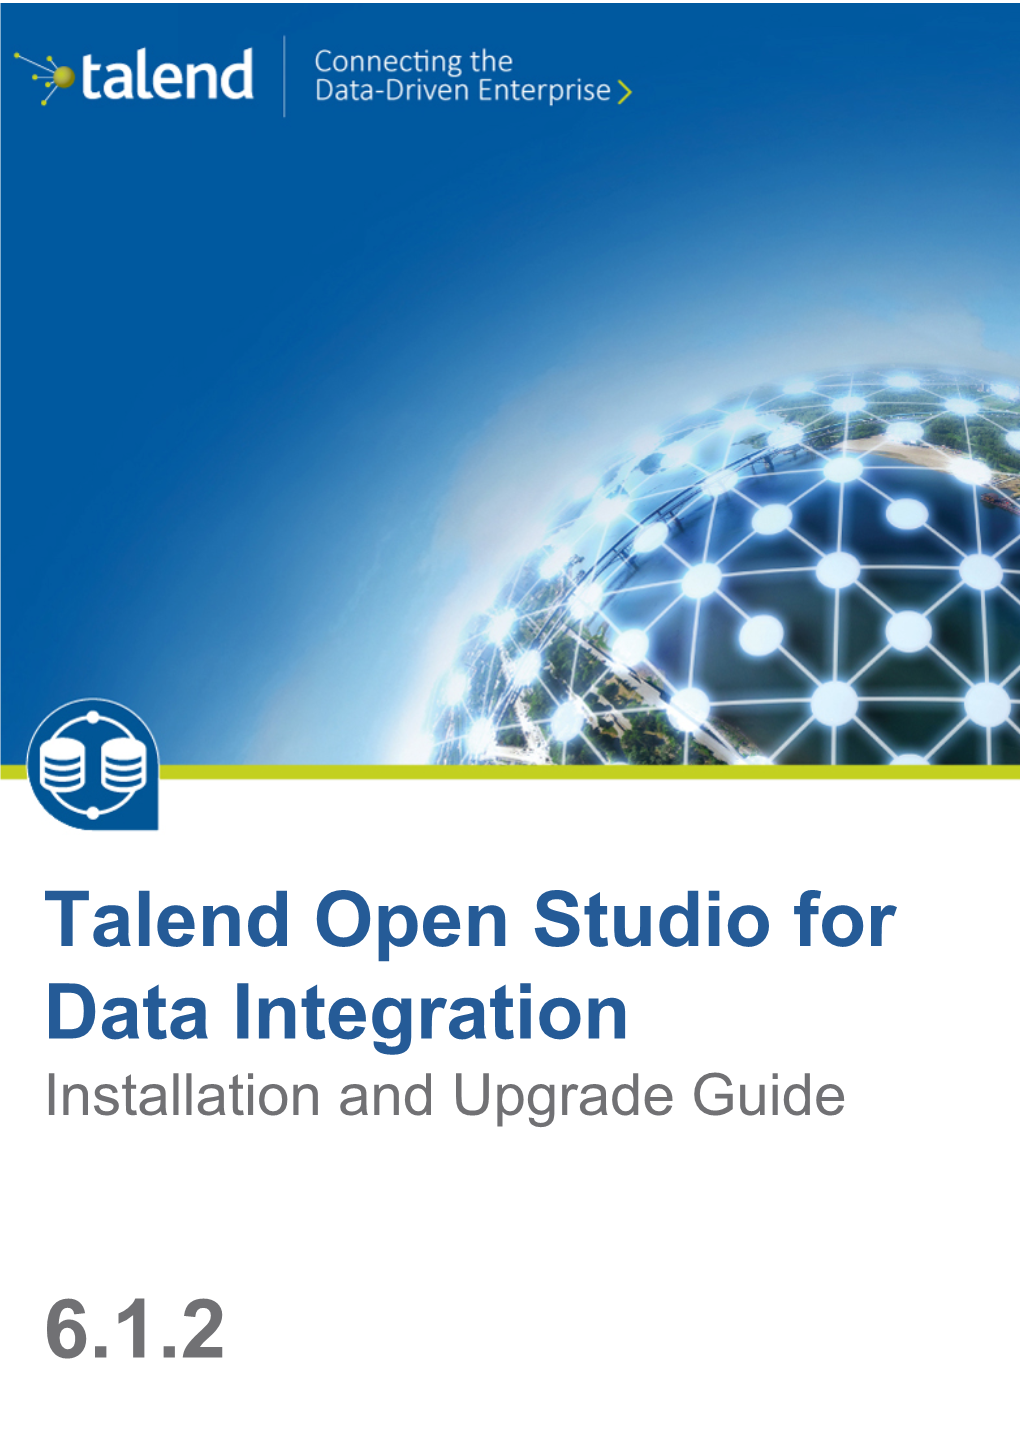 Talend Open Studio for Data Integration Installation and Upgrade Guide